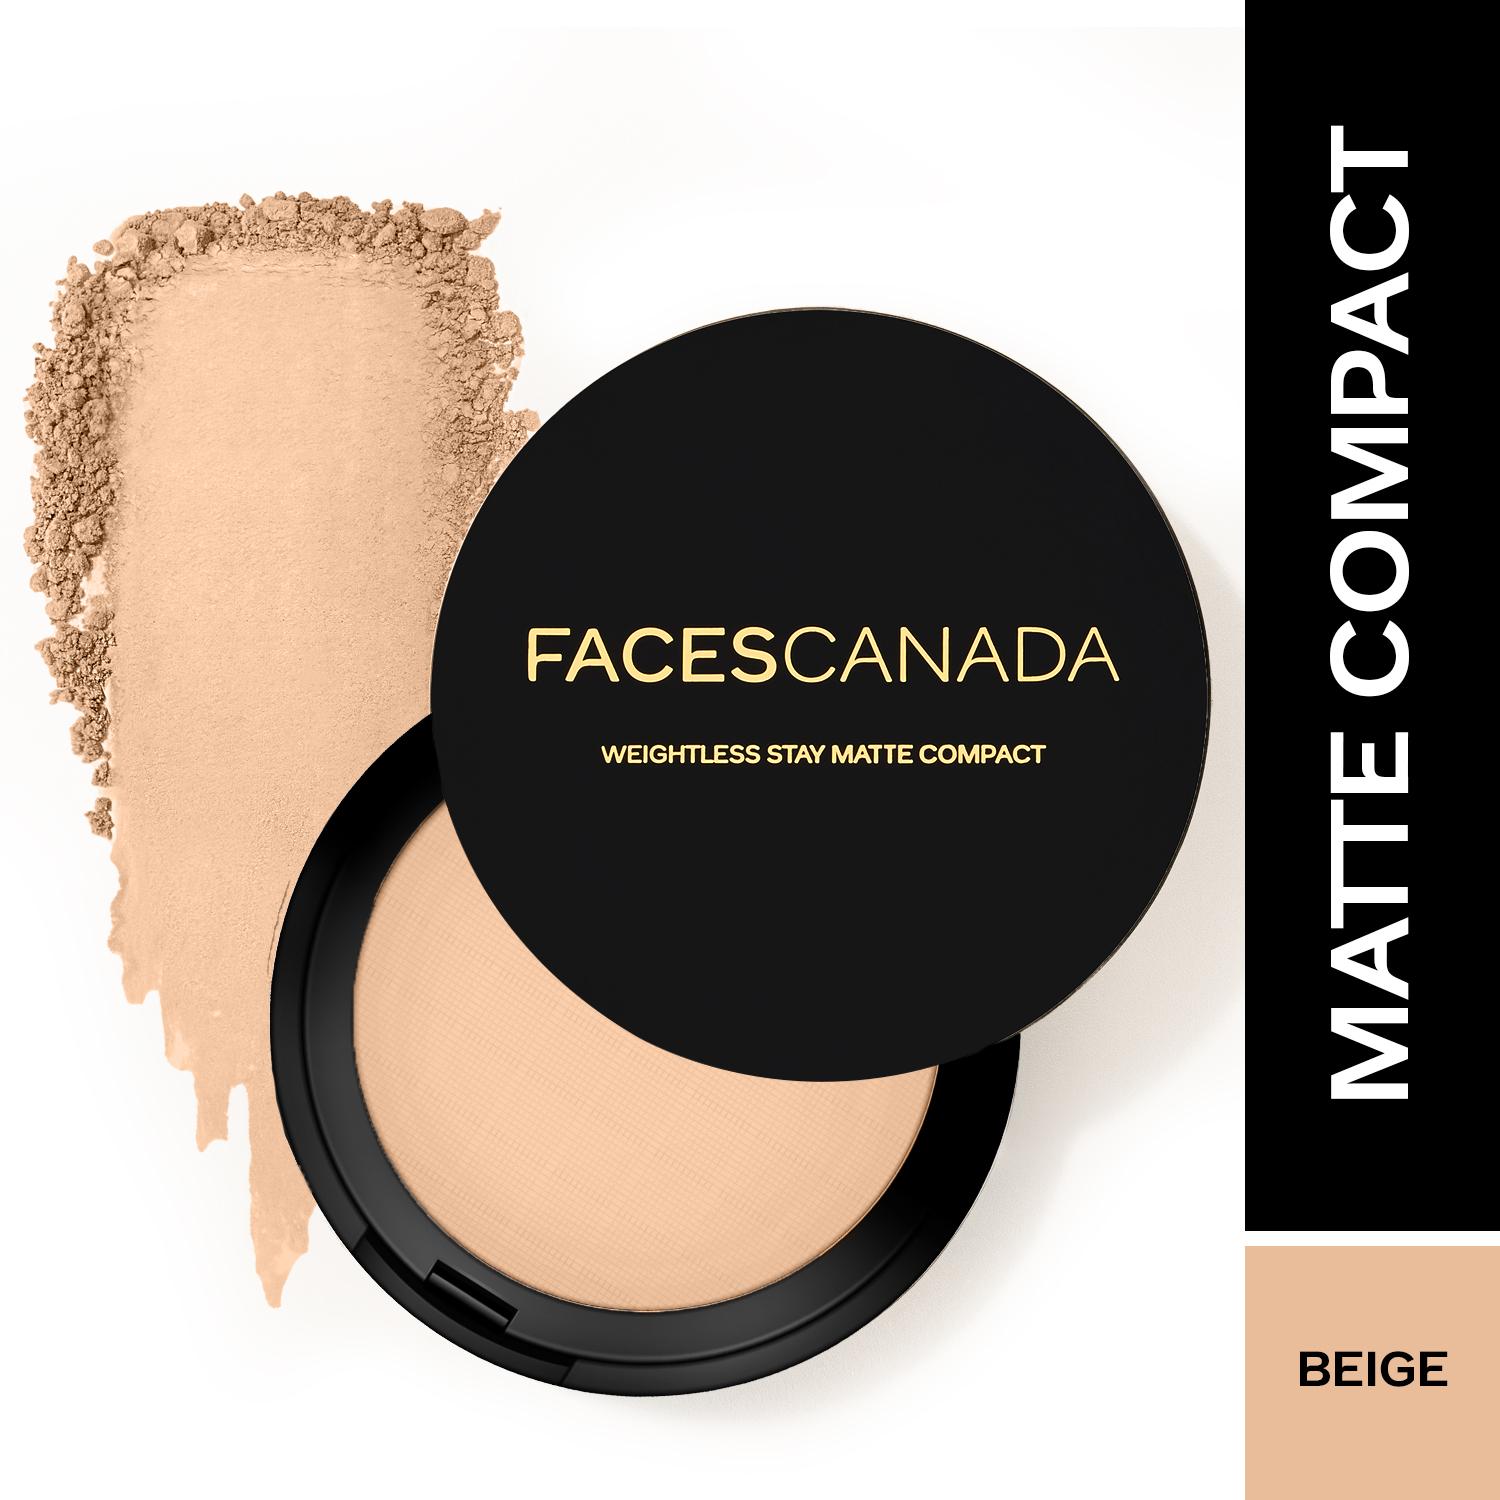 Faces Canada | Faces Canada Weightless Stay Matte Finish Compact Powder,Non Oily Matte Pressed Powder -Beige (9 g)